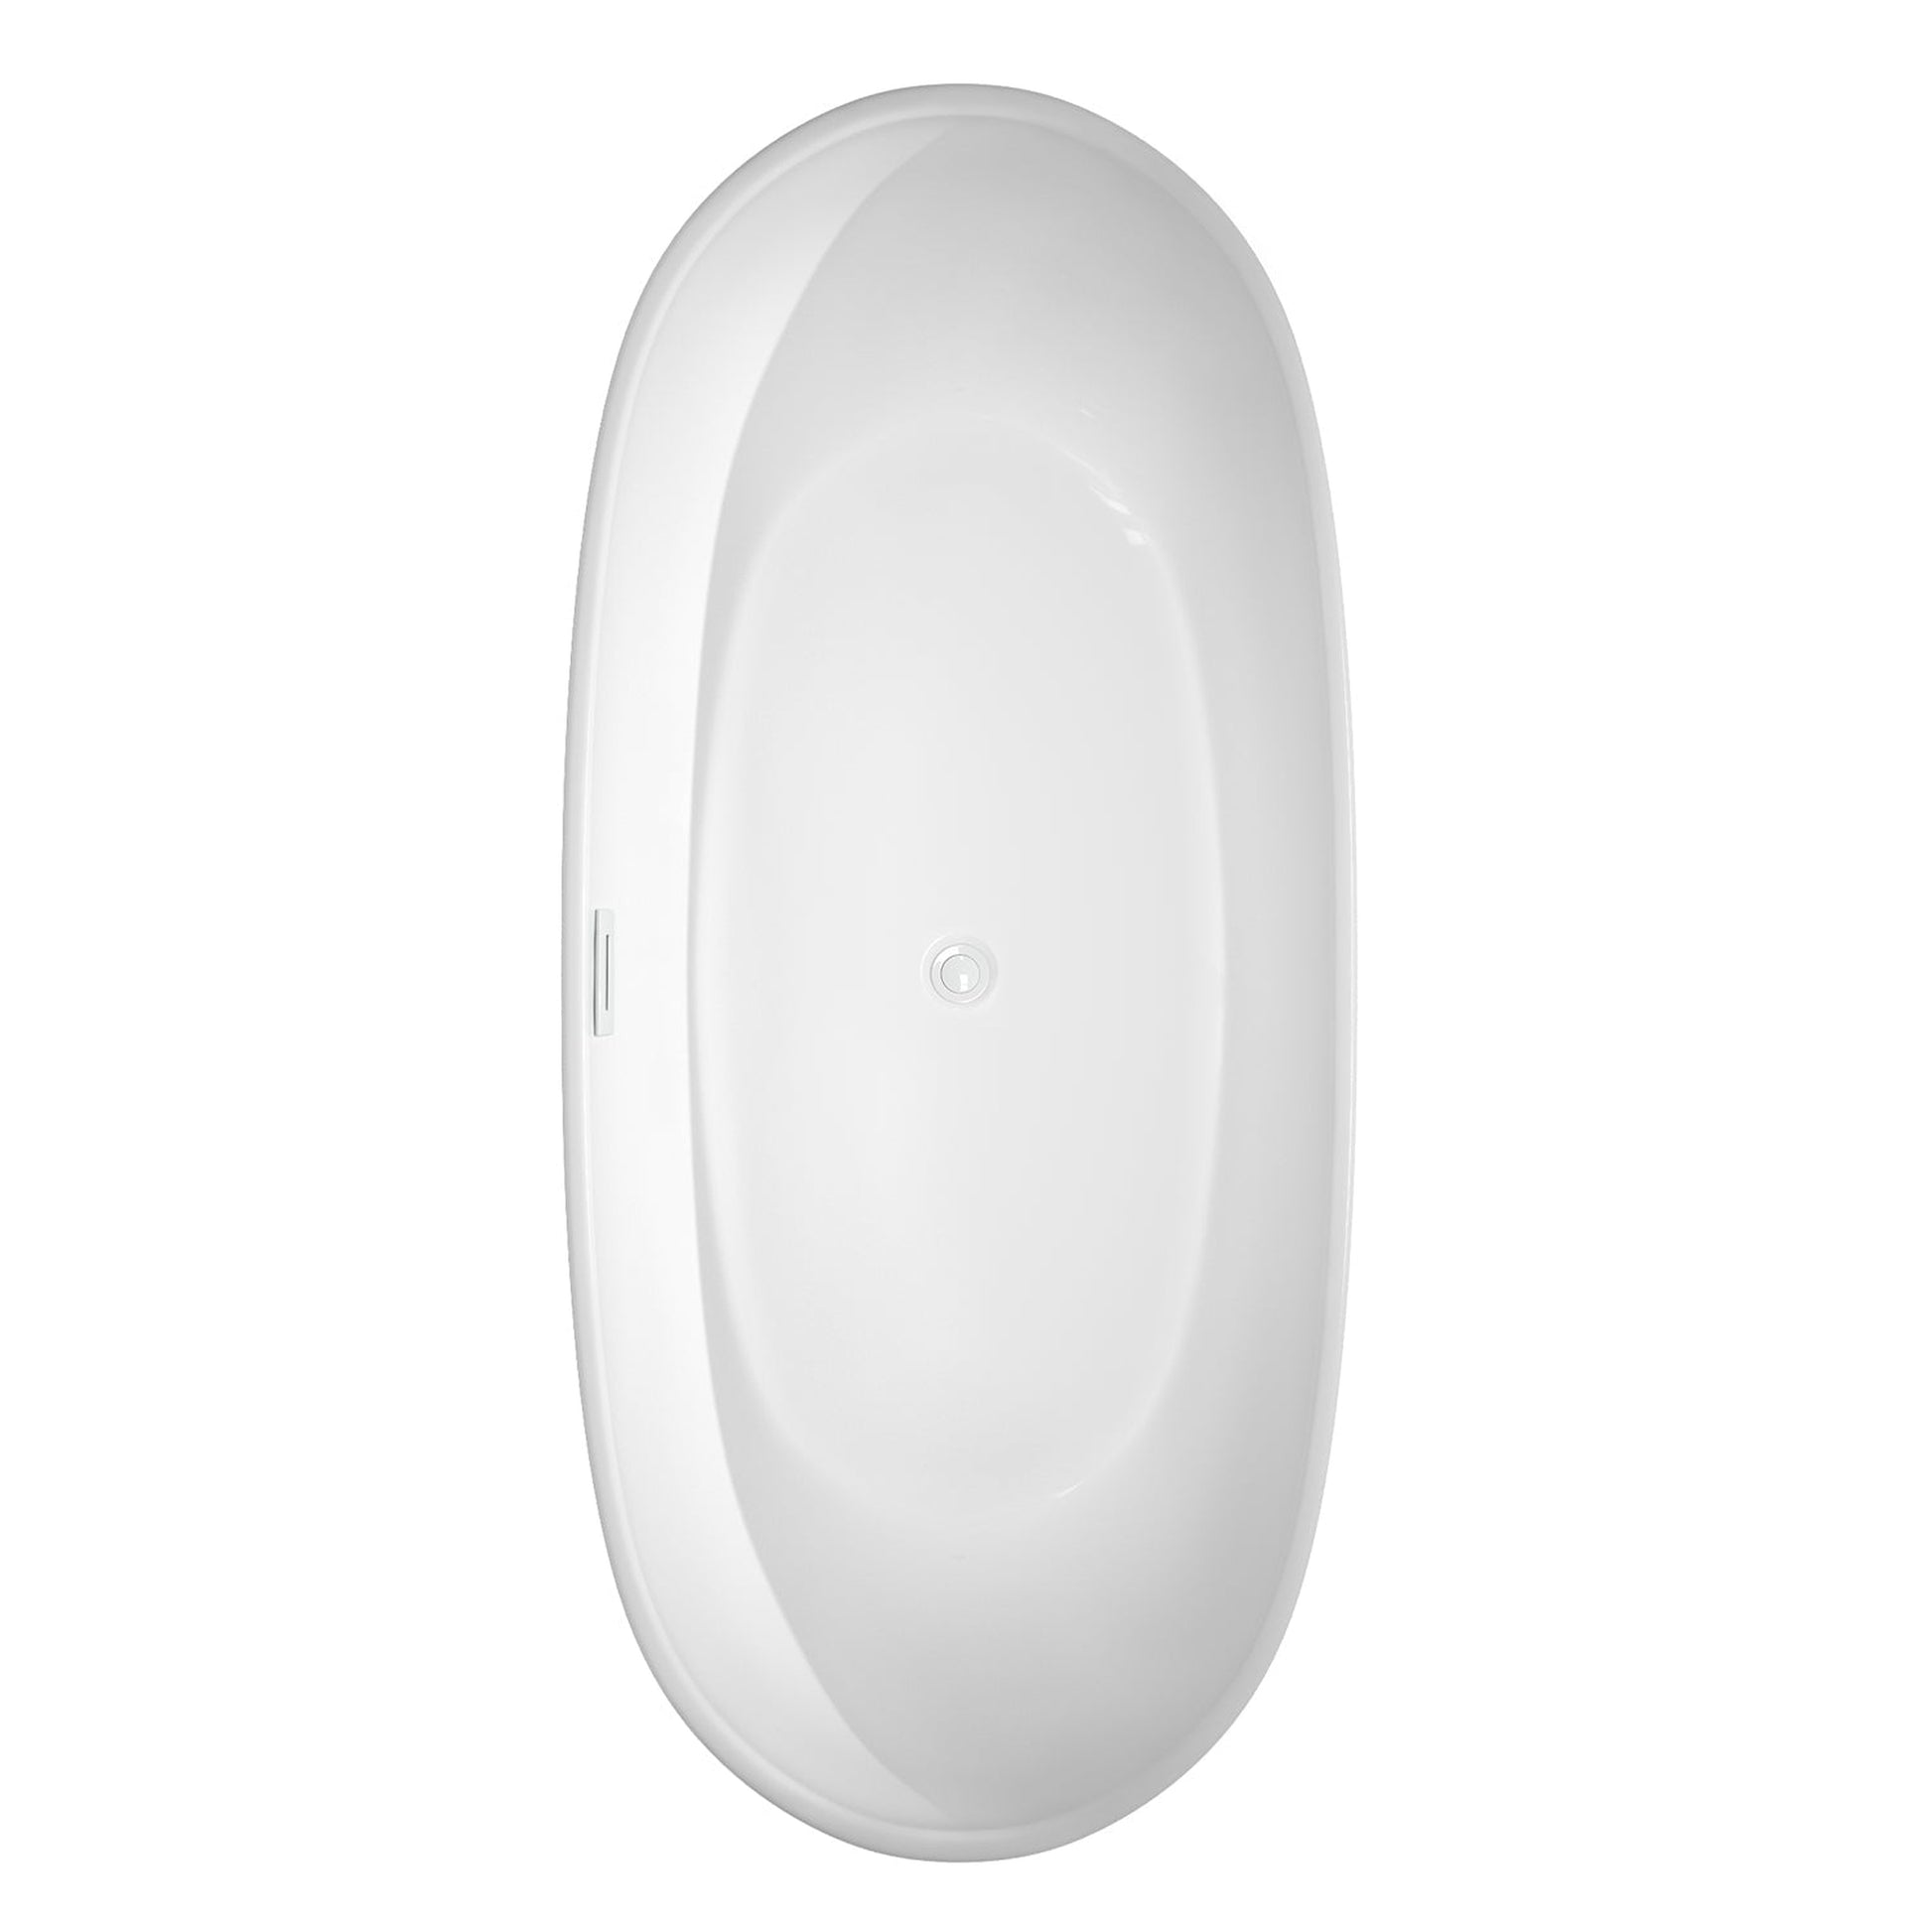 Wyndham Collection Rebecca 70" Freestanding Bathtub in White With Shiny White Drain and Overflow Trim